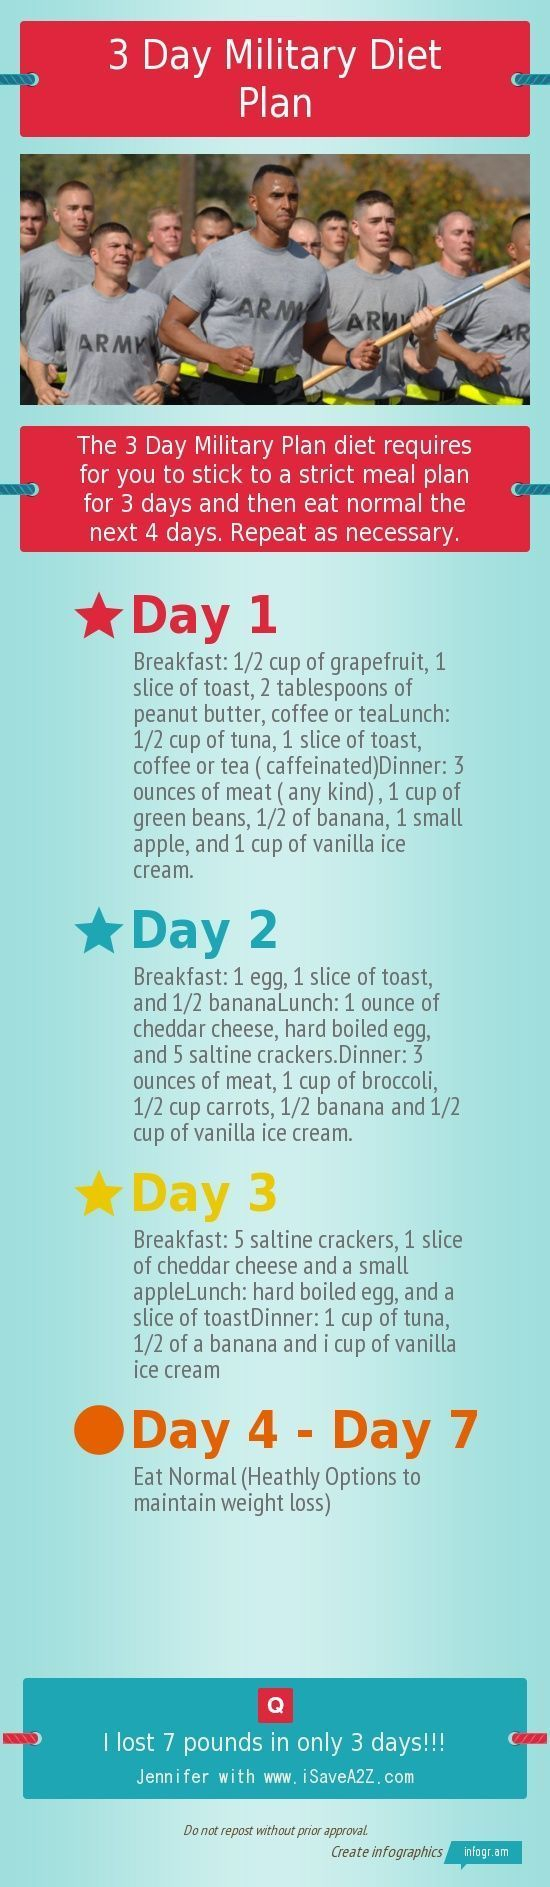 3 Day Military Diet Plan Infographic